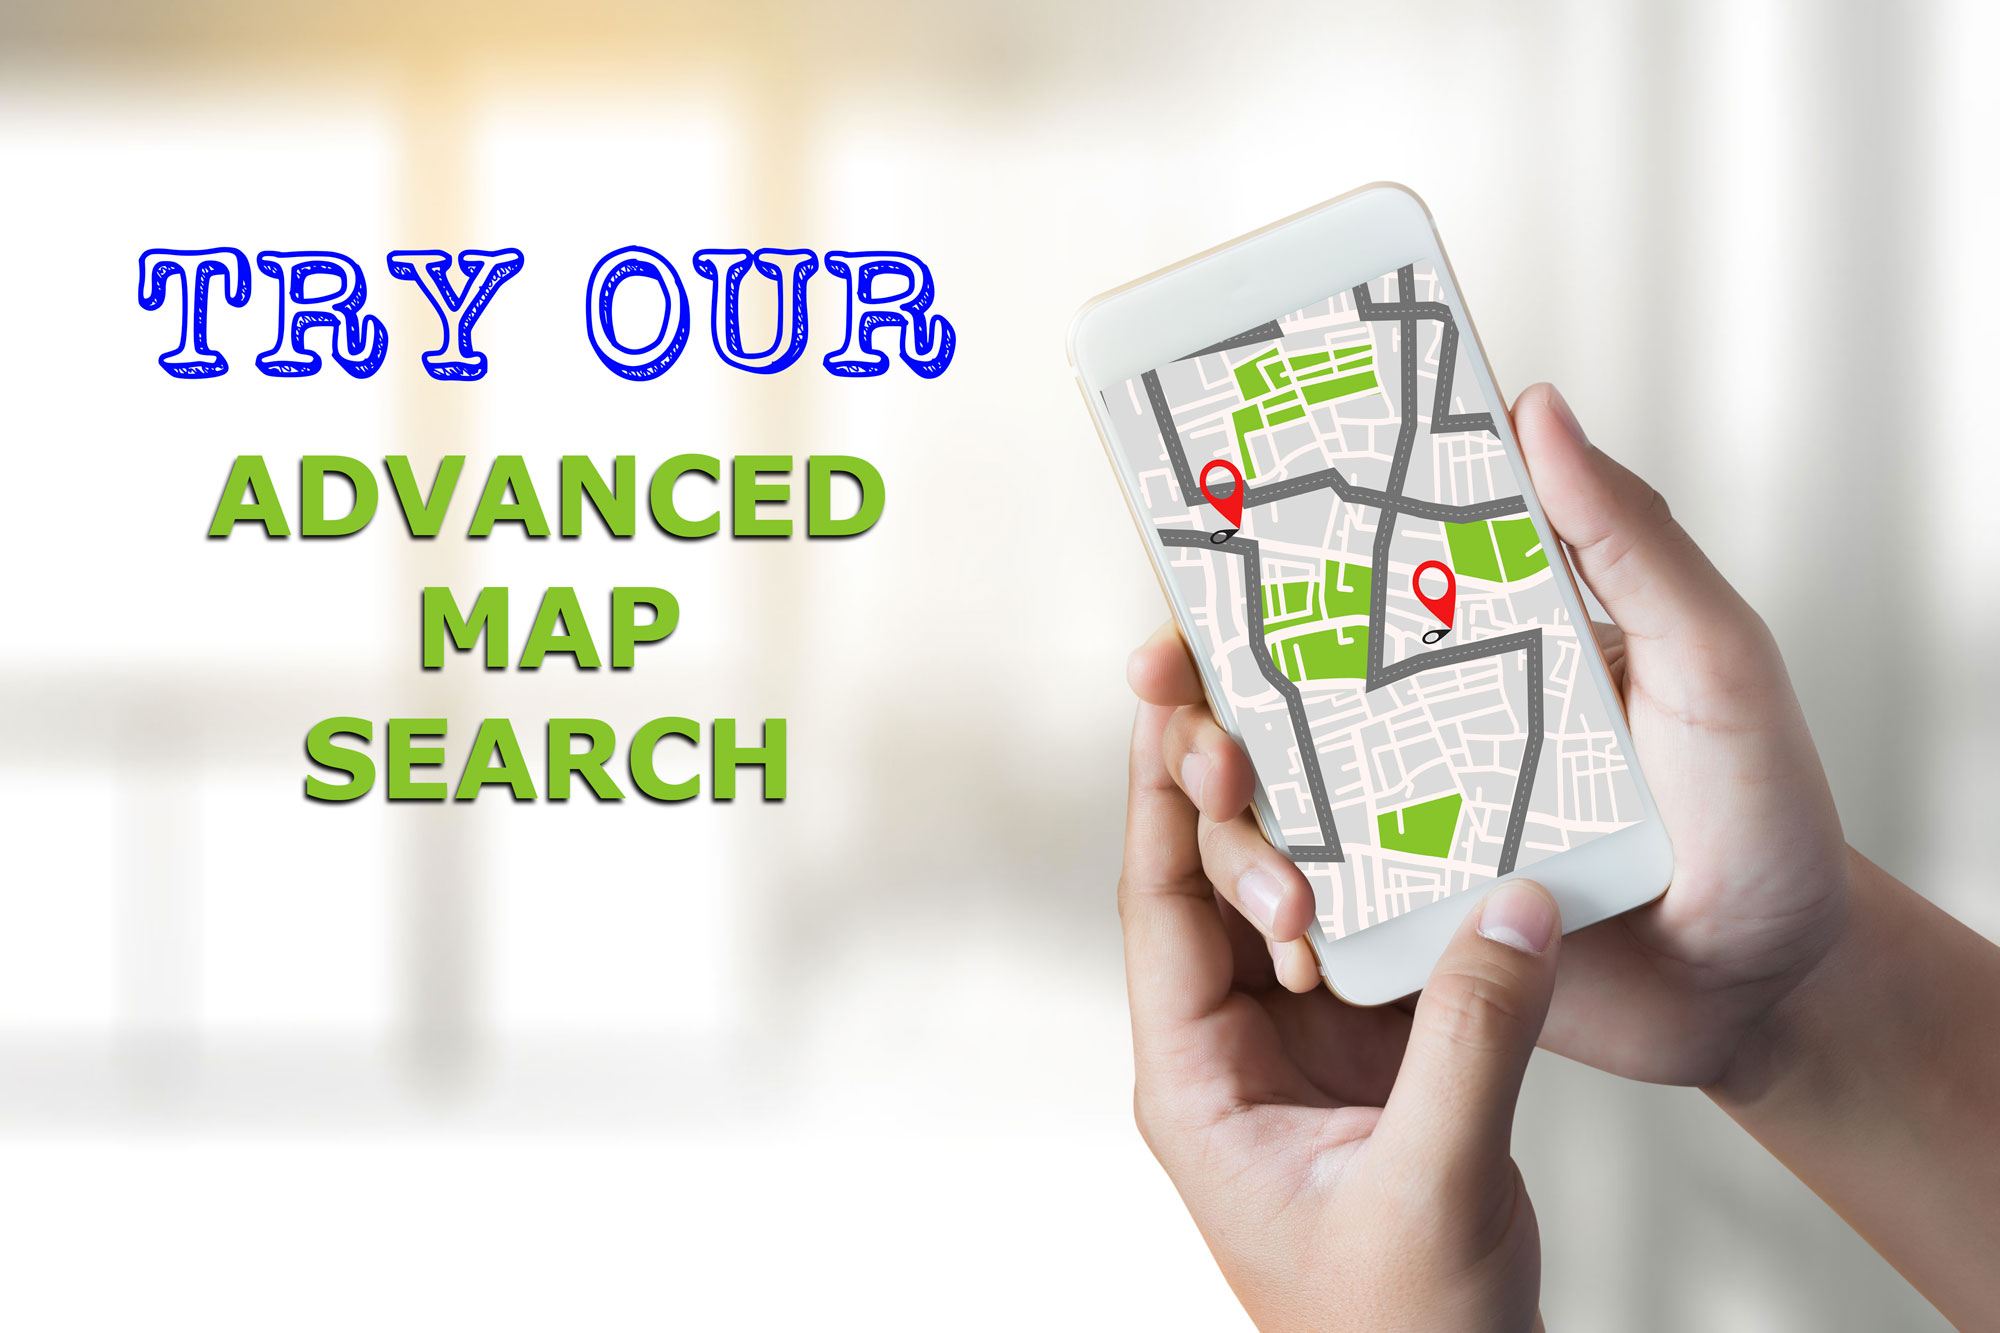 Hand holding mobile phone with map and text Try Our Advanced Map Search